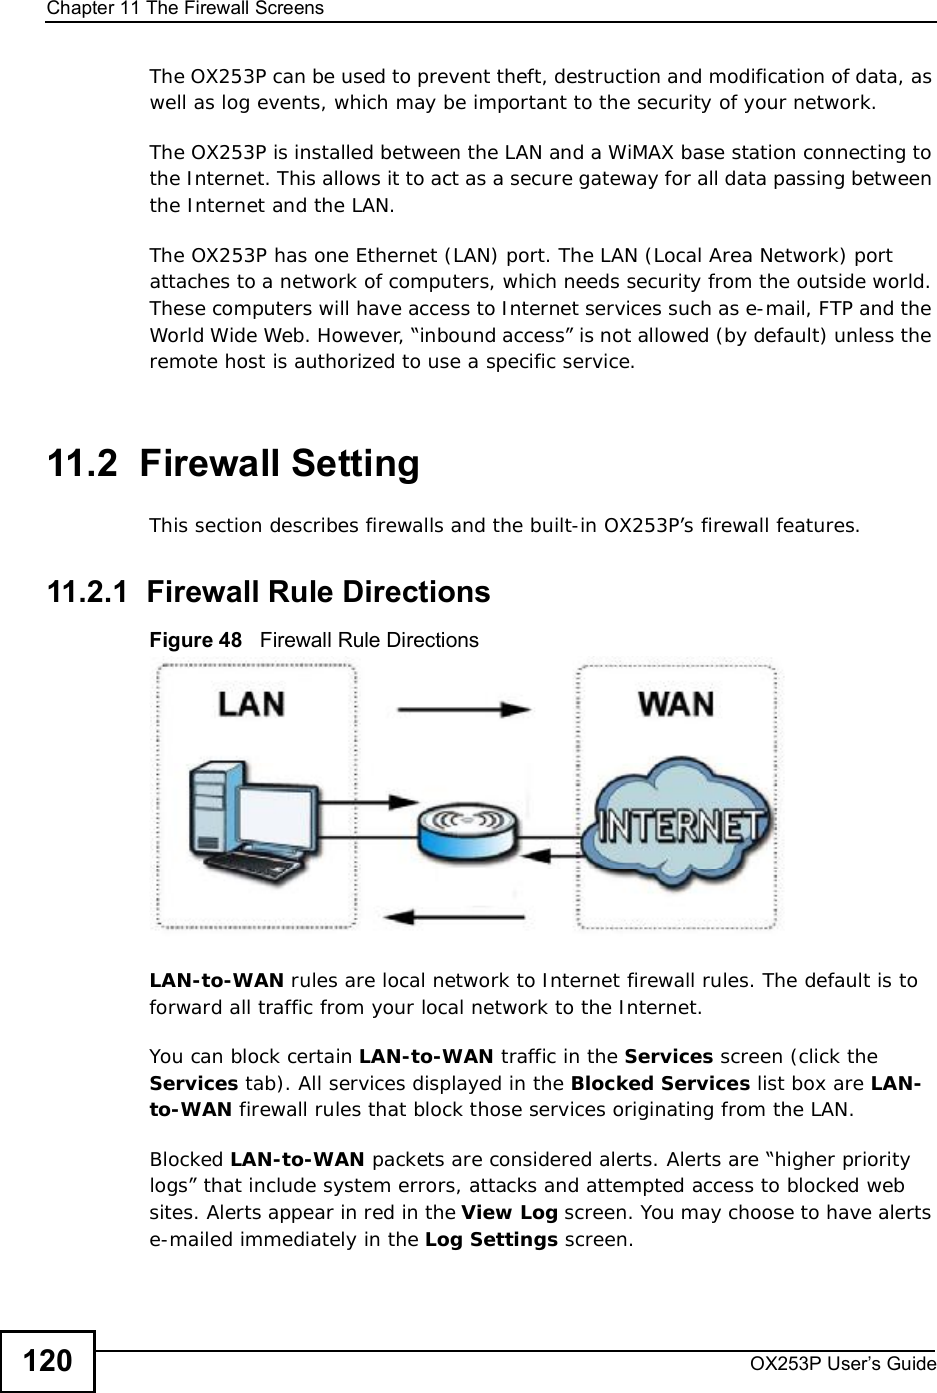 Chapter 11The Firewall ScreensOX253P User’s Guide120The OX253P can be used to prevent theft, destruction and modification of data, as well as log events, which may be important to the security of your network. The OX253P is installed between the LAN and a WiMAX base station connecting to the Internet. This allows it to act as a secure gateway for all data passing between the Internet and the LAN.The OX253P has one Ethernet (LAN) port. The LAN (Local Area Network) port attaches to a network of computers, which needs security from the outside world. These computers will have access to Internet services such as e-mail, FTP and the World Wide Web. However, “inbound access” is not allowed (by default) unless the remote host is authorized to use a specific service.11.2  Firewall SettingThis section describes firewalls and the built-in OX253P’s firewall features.11.2.1  Firewall Rule DirectionsFigure 48   Firewall Rule DirectionsLAN-to-WAN rules are local network to Internet firewall rules. The default is to forward all traffic from your local network to the Internet. You can block certain LAN-to-WAN traffic in the Services screen (click the Services tab). All services displayed in the Blocked Services list box are LAN-to-WAN firewall rules that block those services originating from the LAN. Blocked LAN-to-WAN packets are considered alerts. Alerts are “higher priority logs” that include system errors, attacks and attempted access to blocked web sites. Alerts appear in red in the View Log screen. You may choose to have alerts e-mailed immediately in the Log Settings screen.